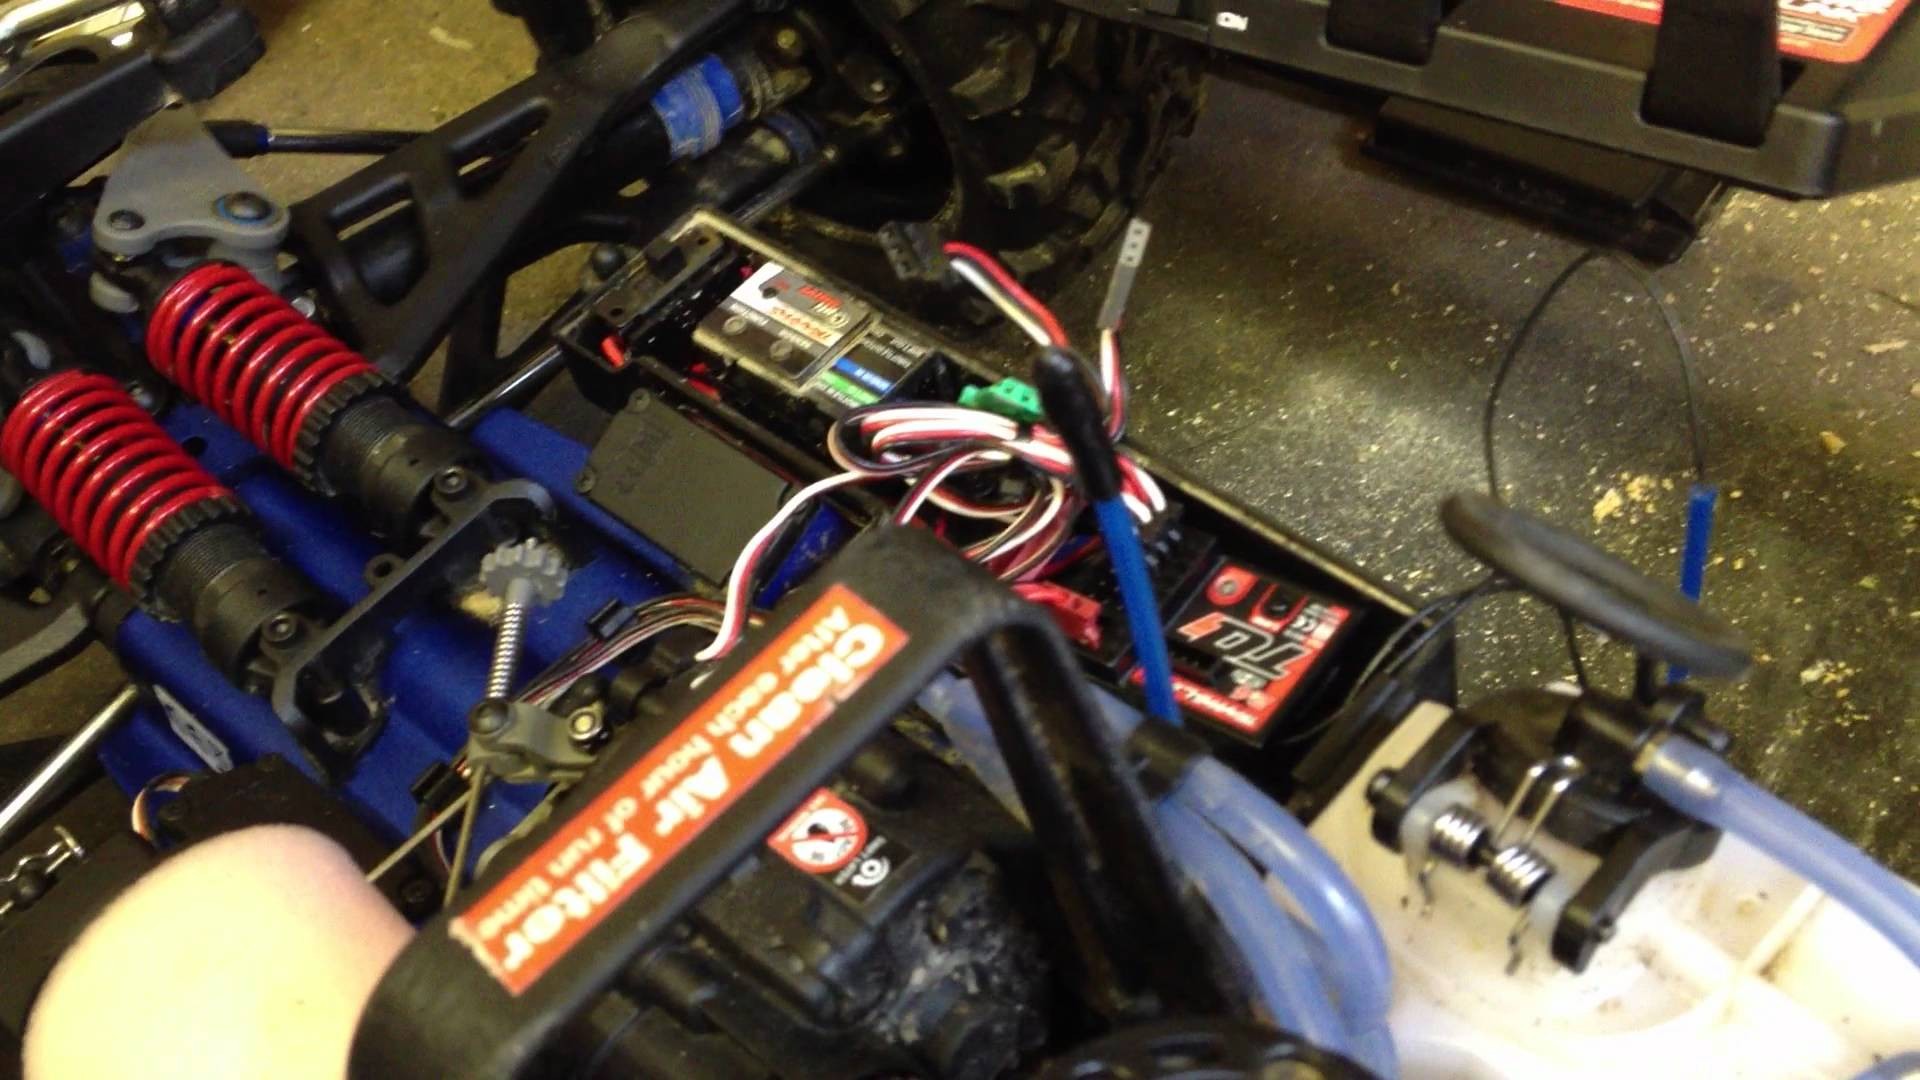 Traxxas Link Tqi Receiver Wiring Diagram from mainetreasurechest.com